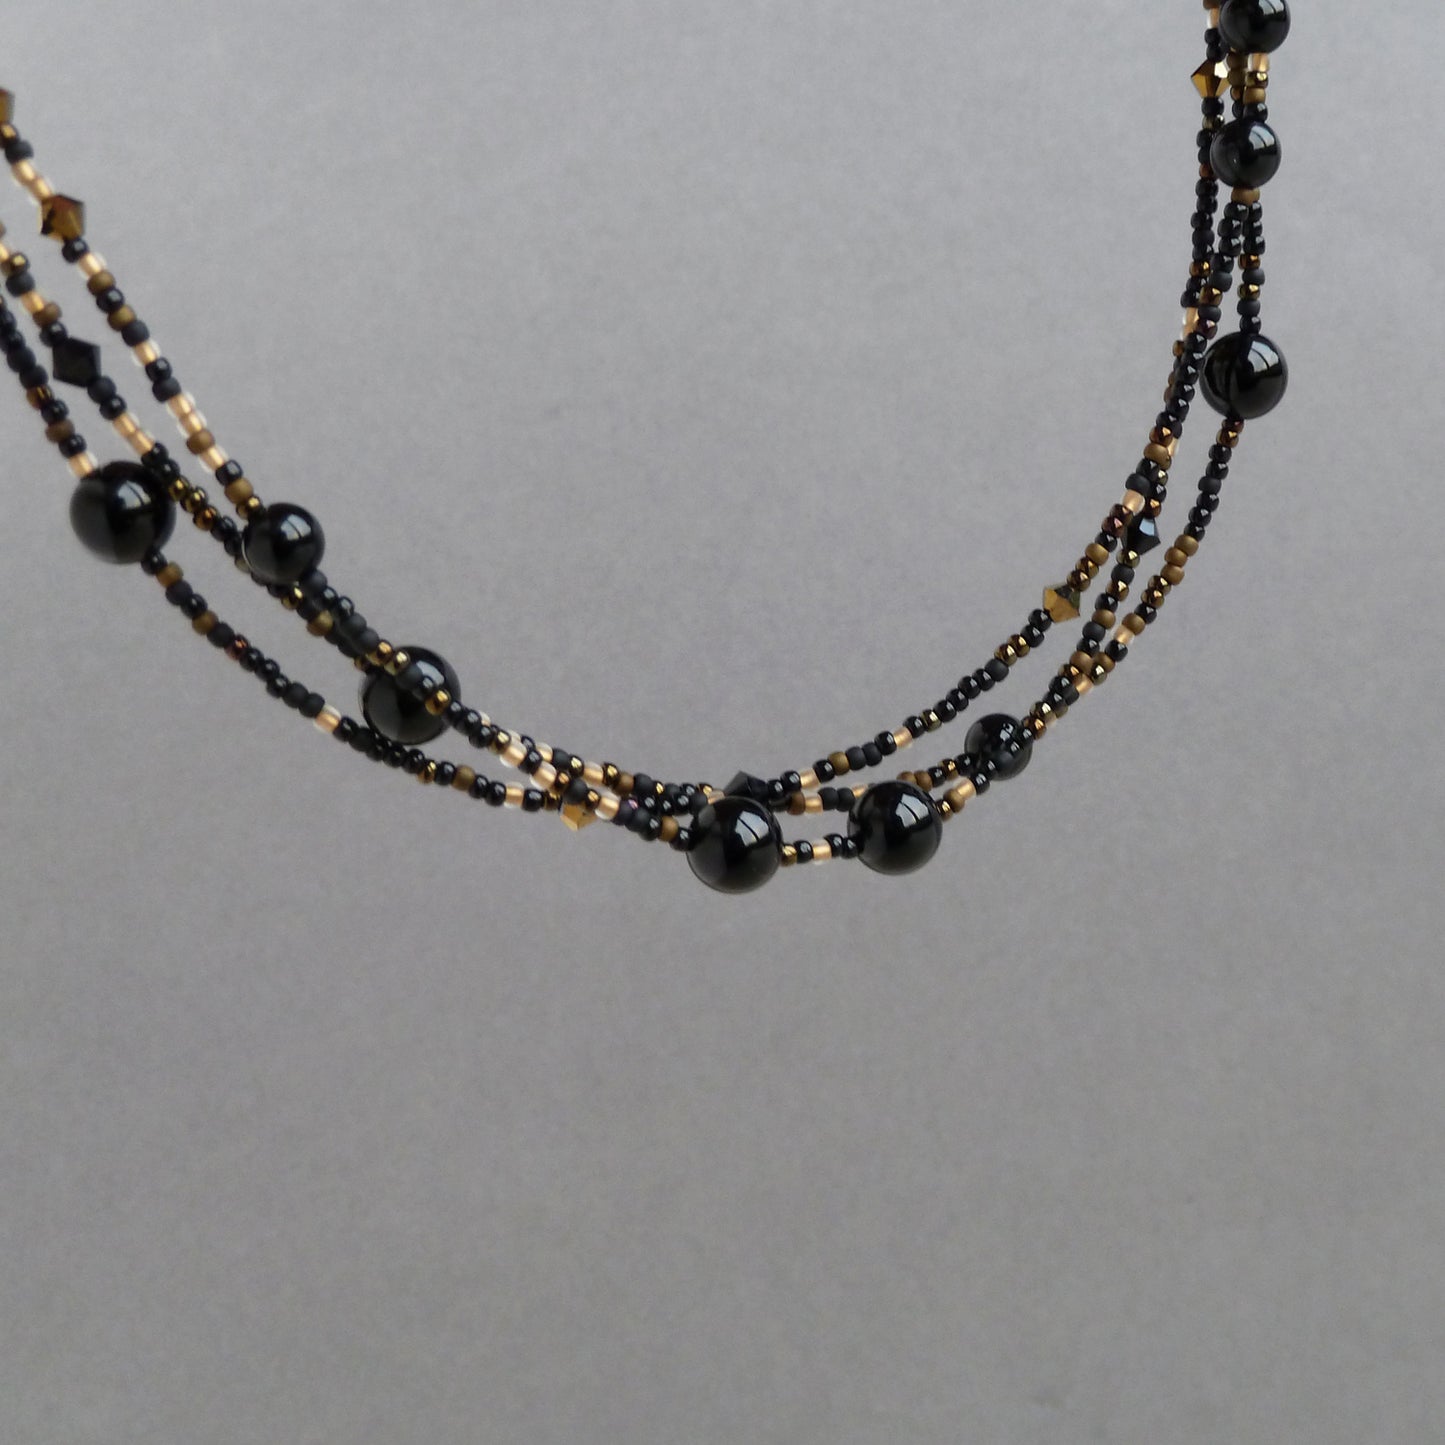 Beaded black necklace